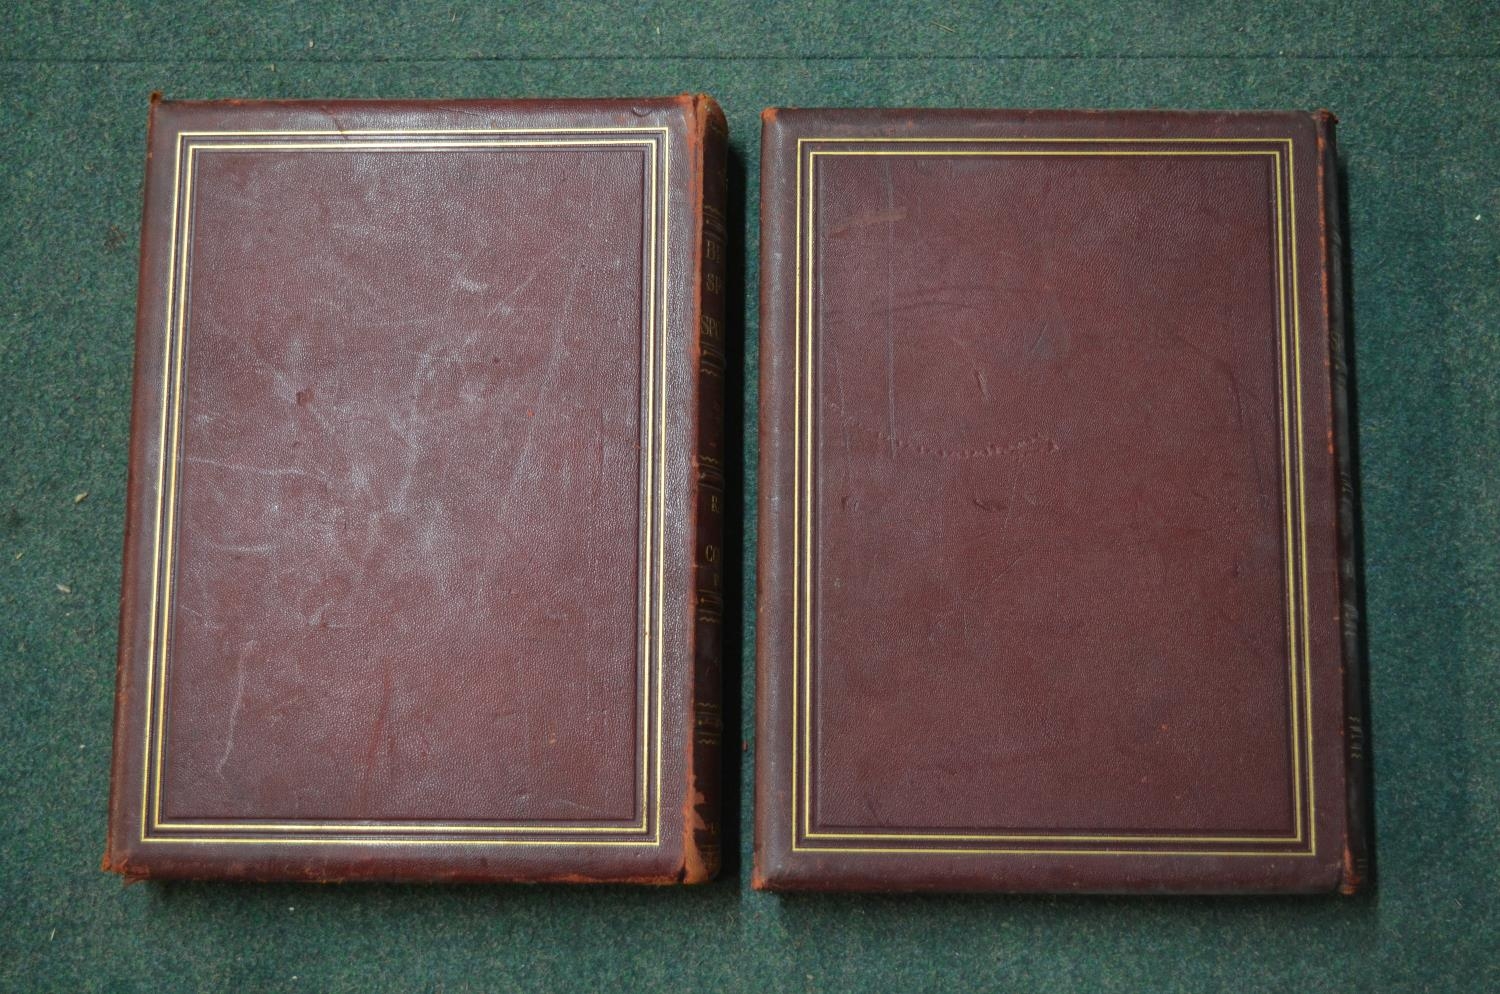 Two bound volumes of British Sports and Sportsmen, part 1 (730/1000) and 2 from 1911 b/w photo - Image 4 of 5